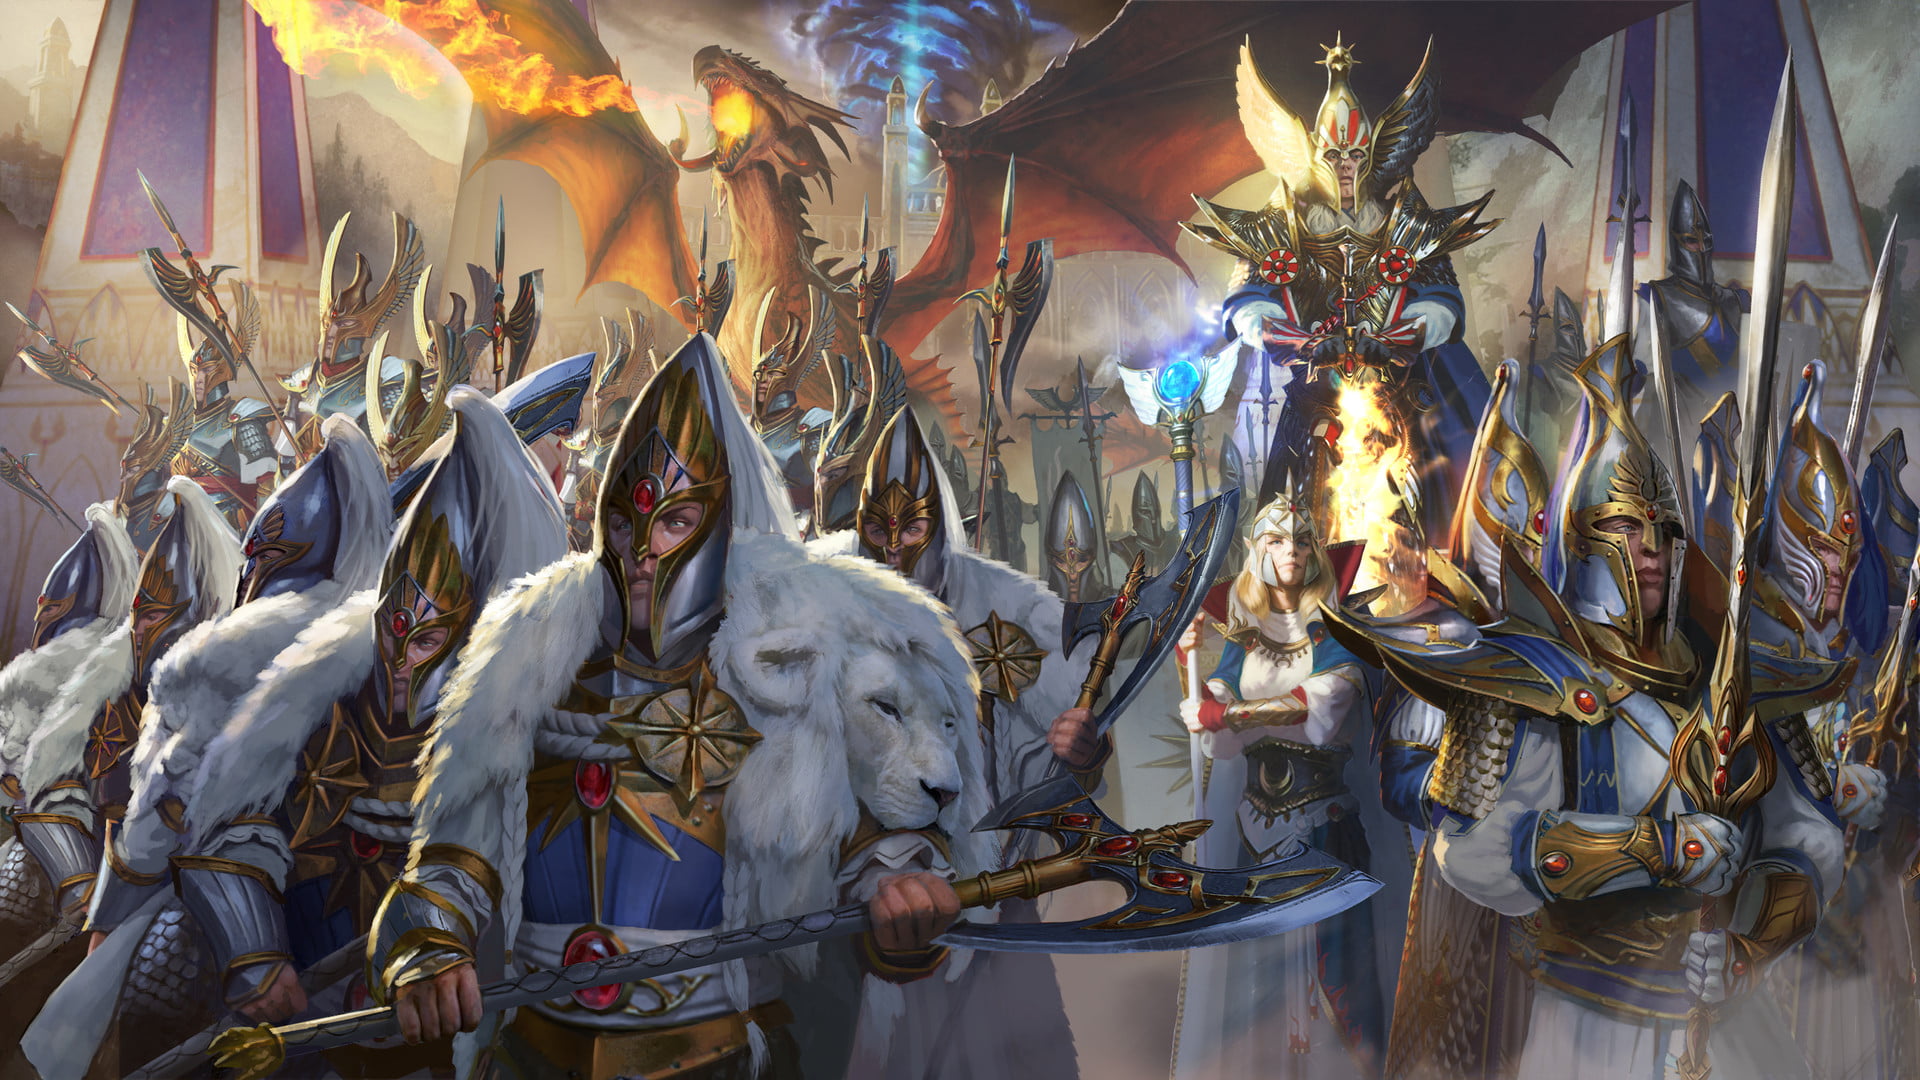 army with soldiers and dragon digital wallpaper, Total War: Warhammer II, Warhammer, High Elf